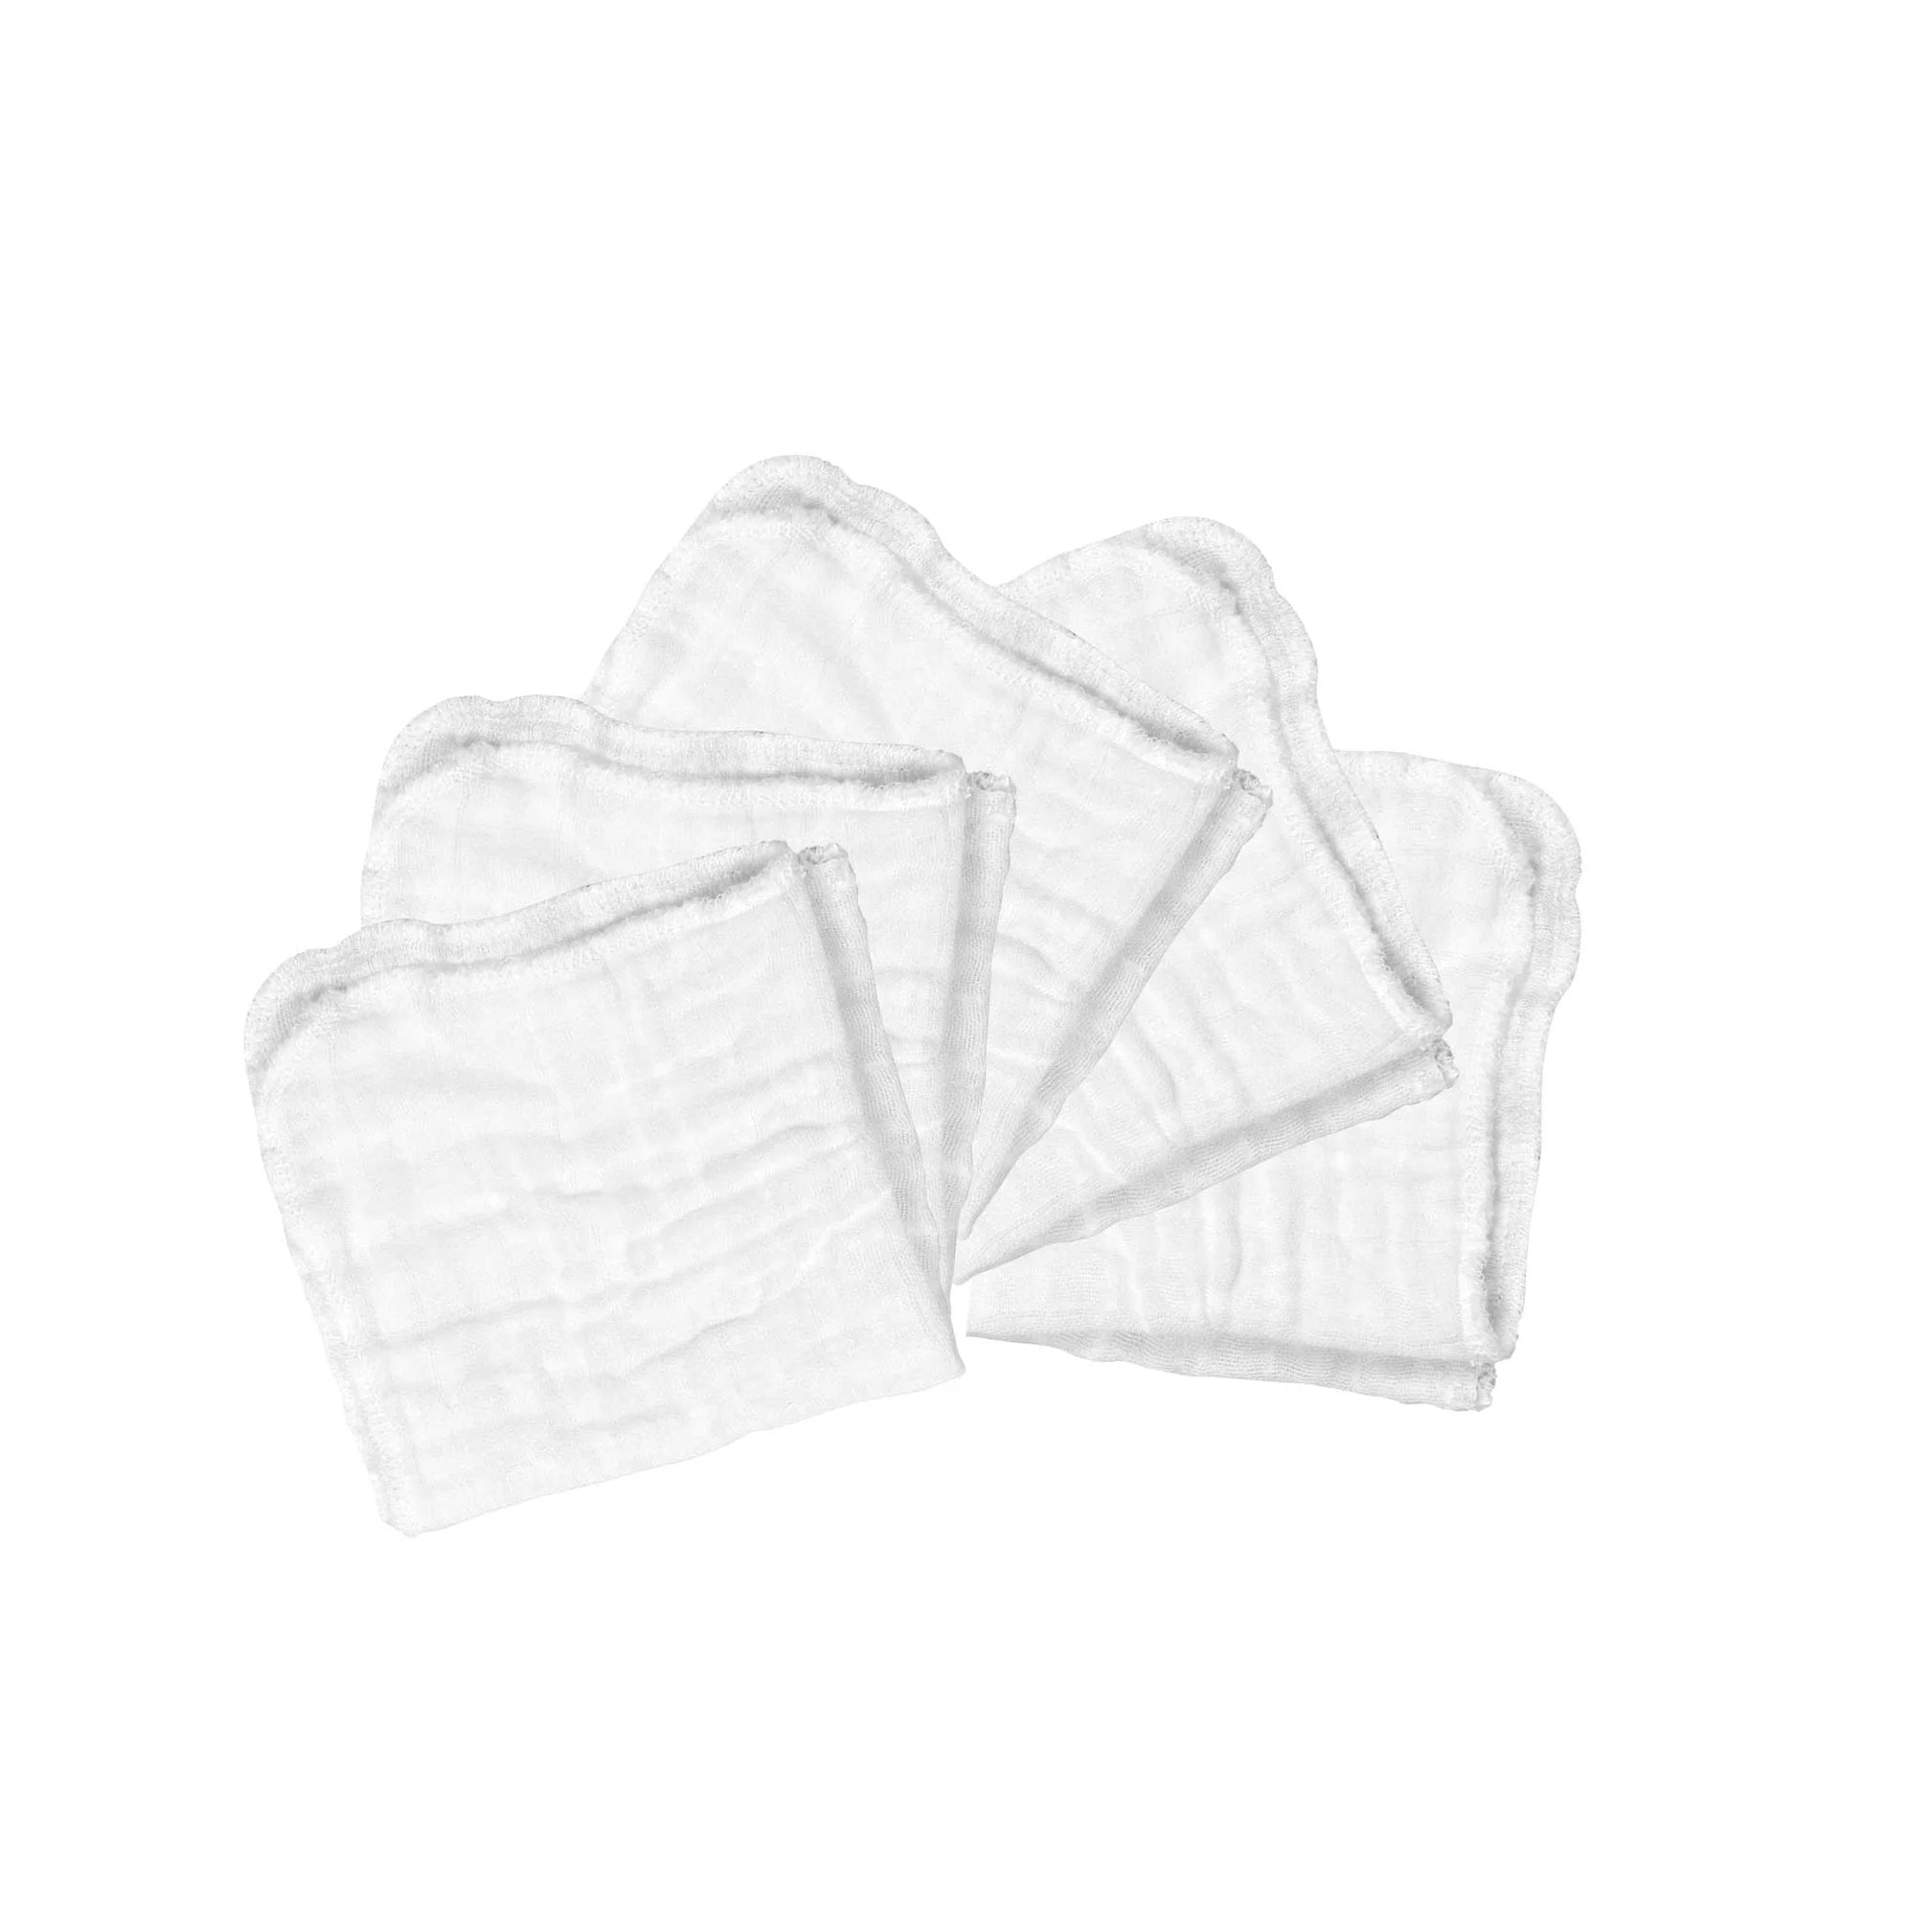 Green Sprouts Organic Cotton Muslin Cloths (5 Pack) - White Set-Green Sprouts-Little Giant Kidz